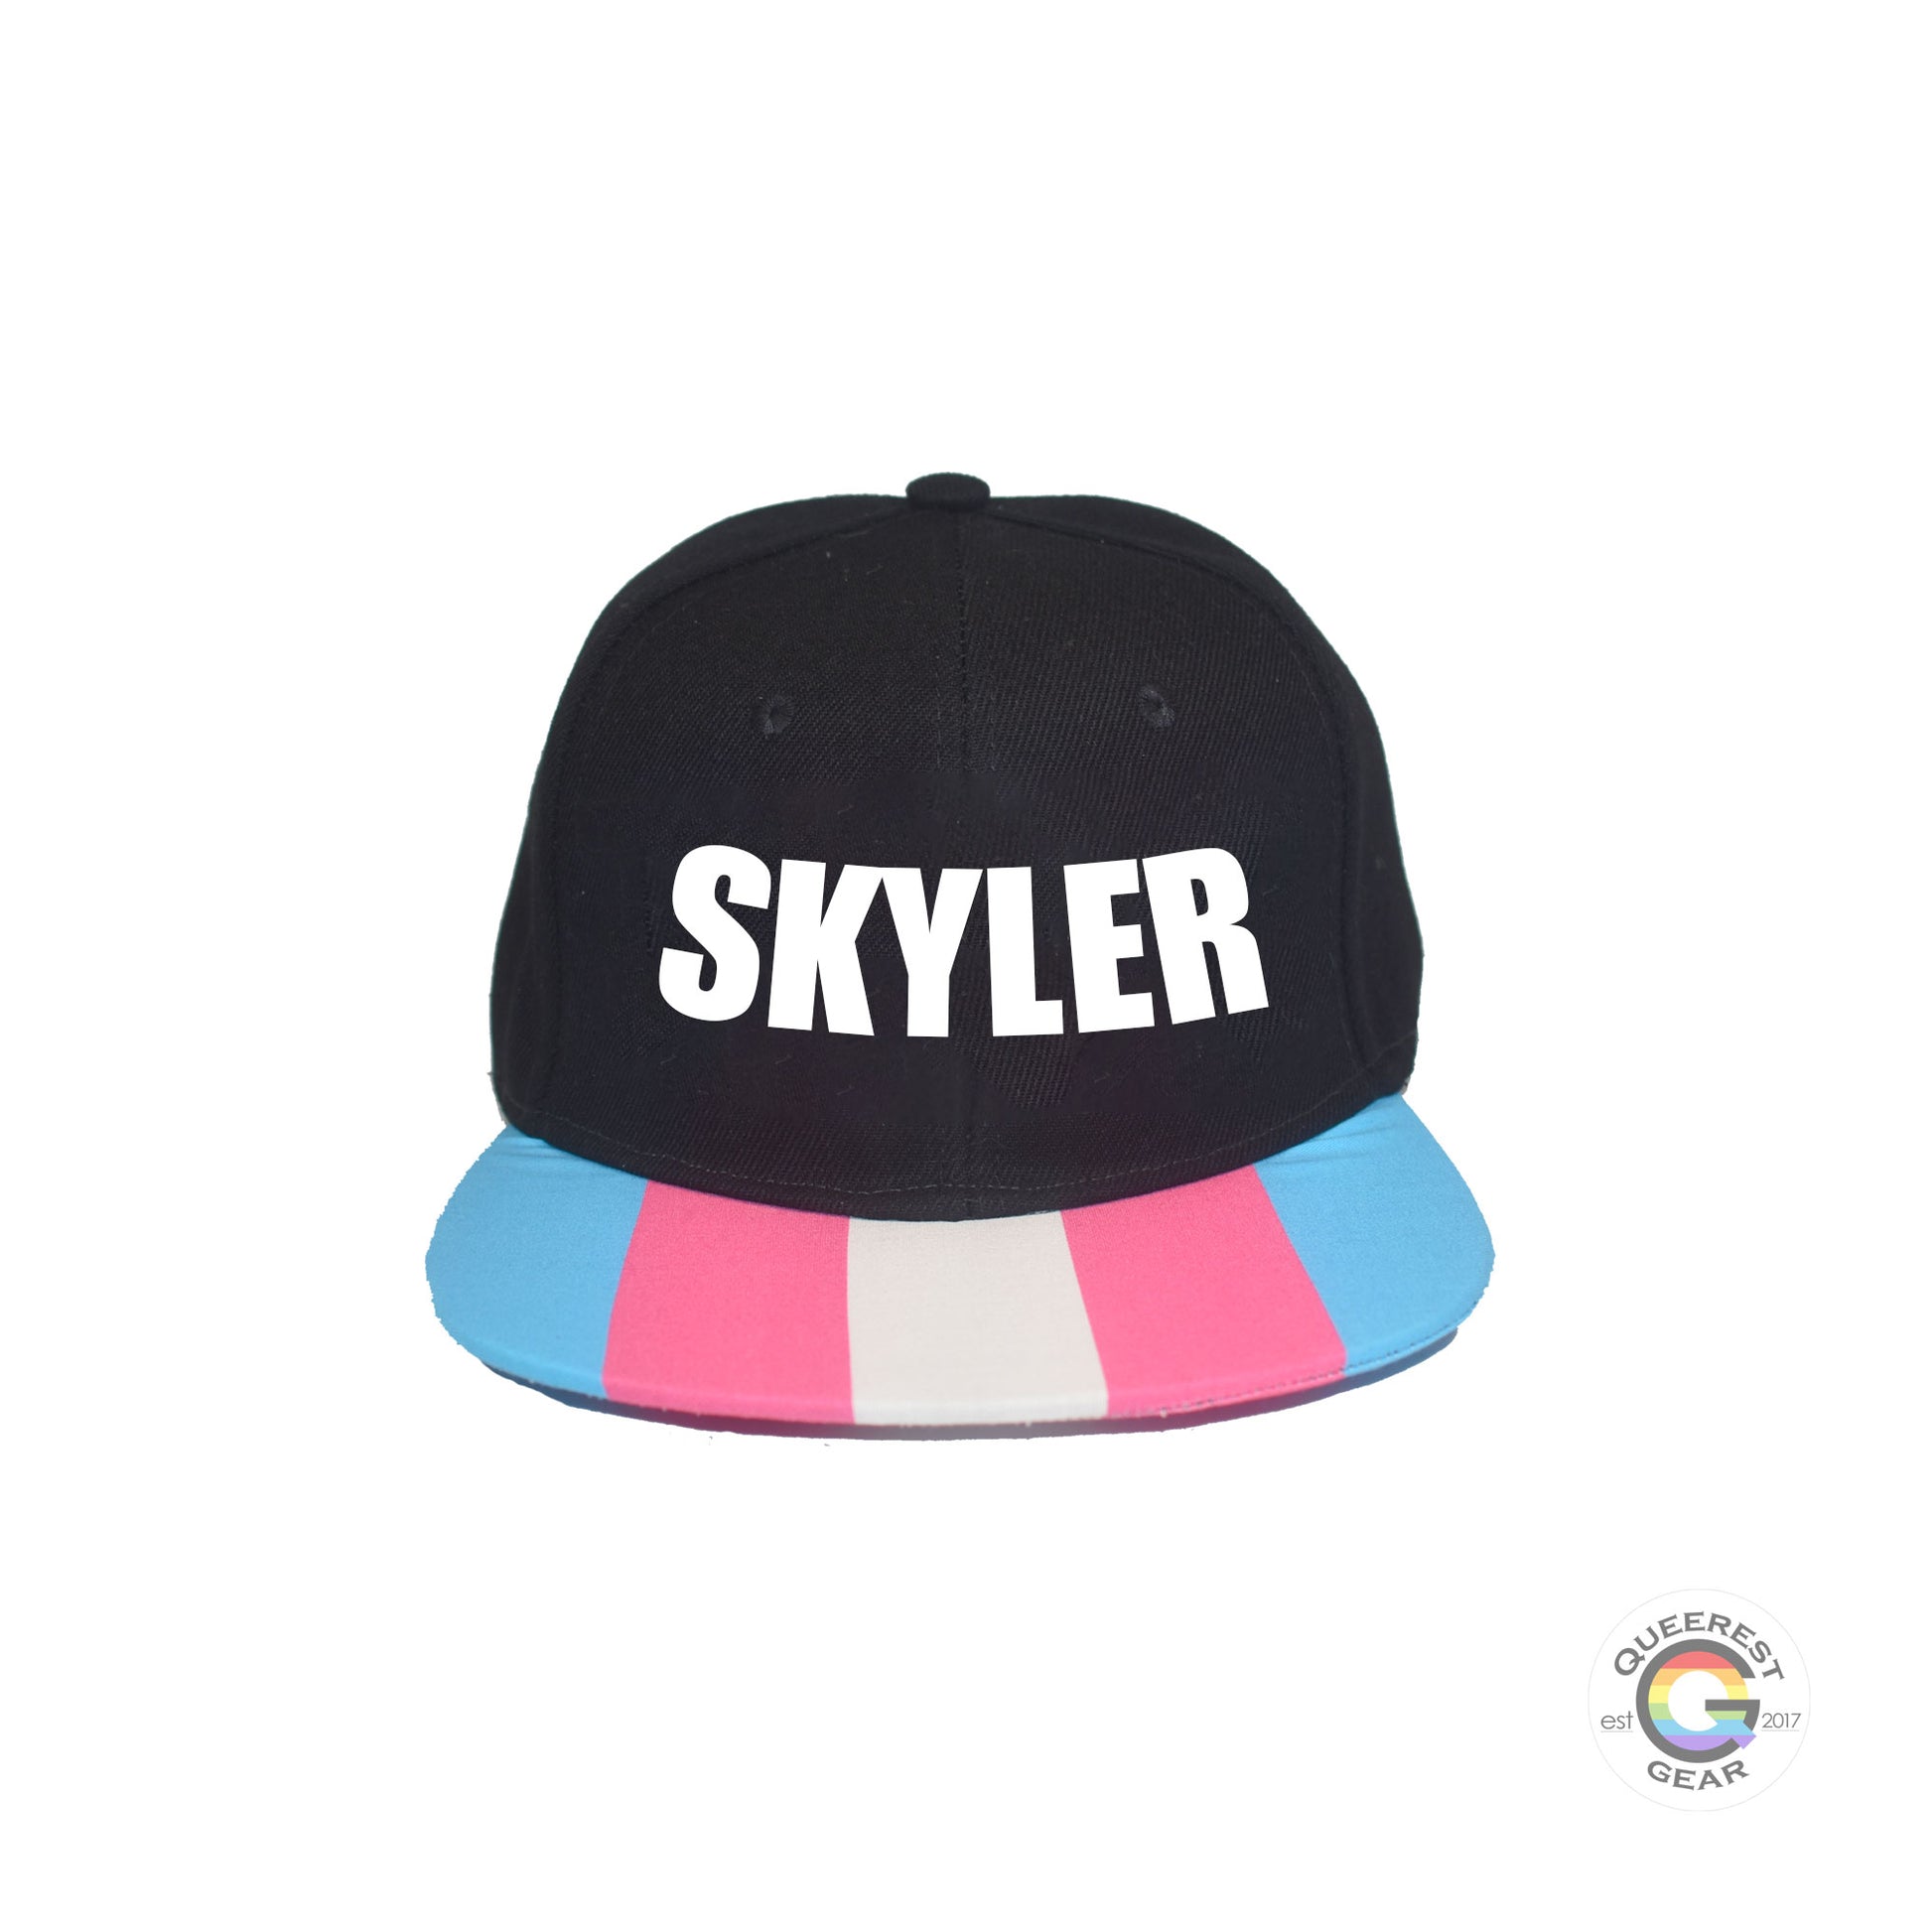 Custom black flat bill snapback hat. The brim has the transgender pride flag on both sides and the front of the hat has the name “skyler” in white. Front view